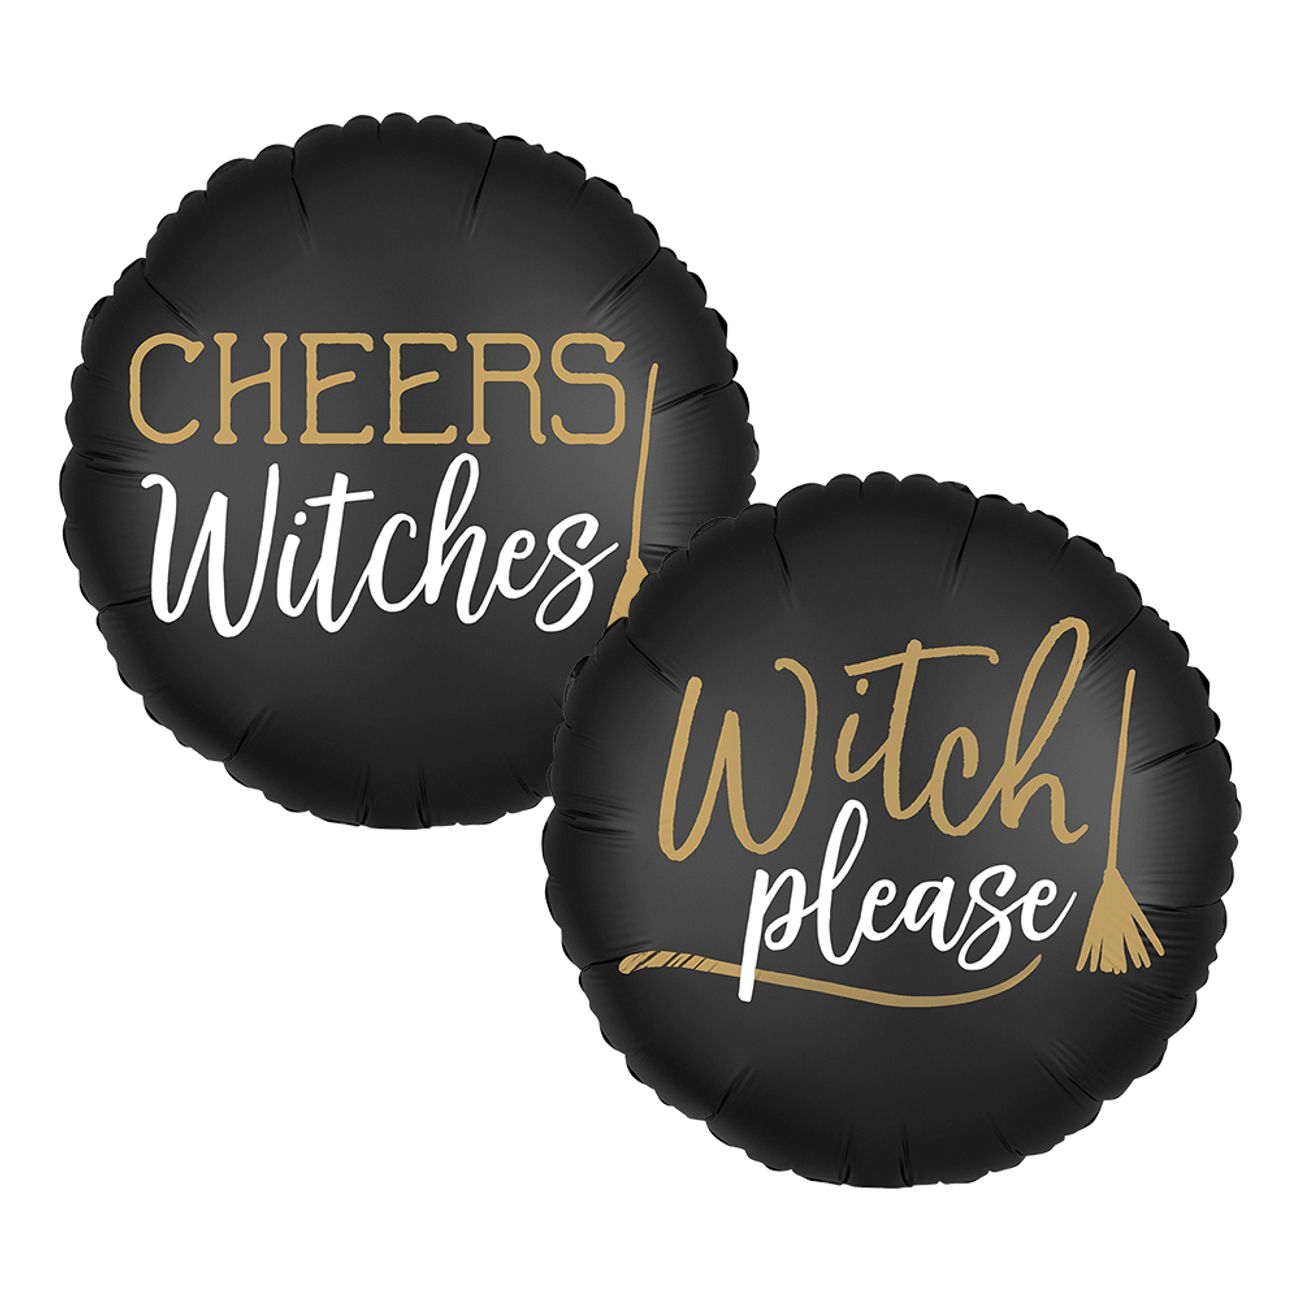 folieballong-cheers-witches-1